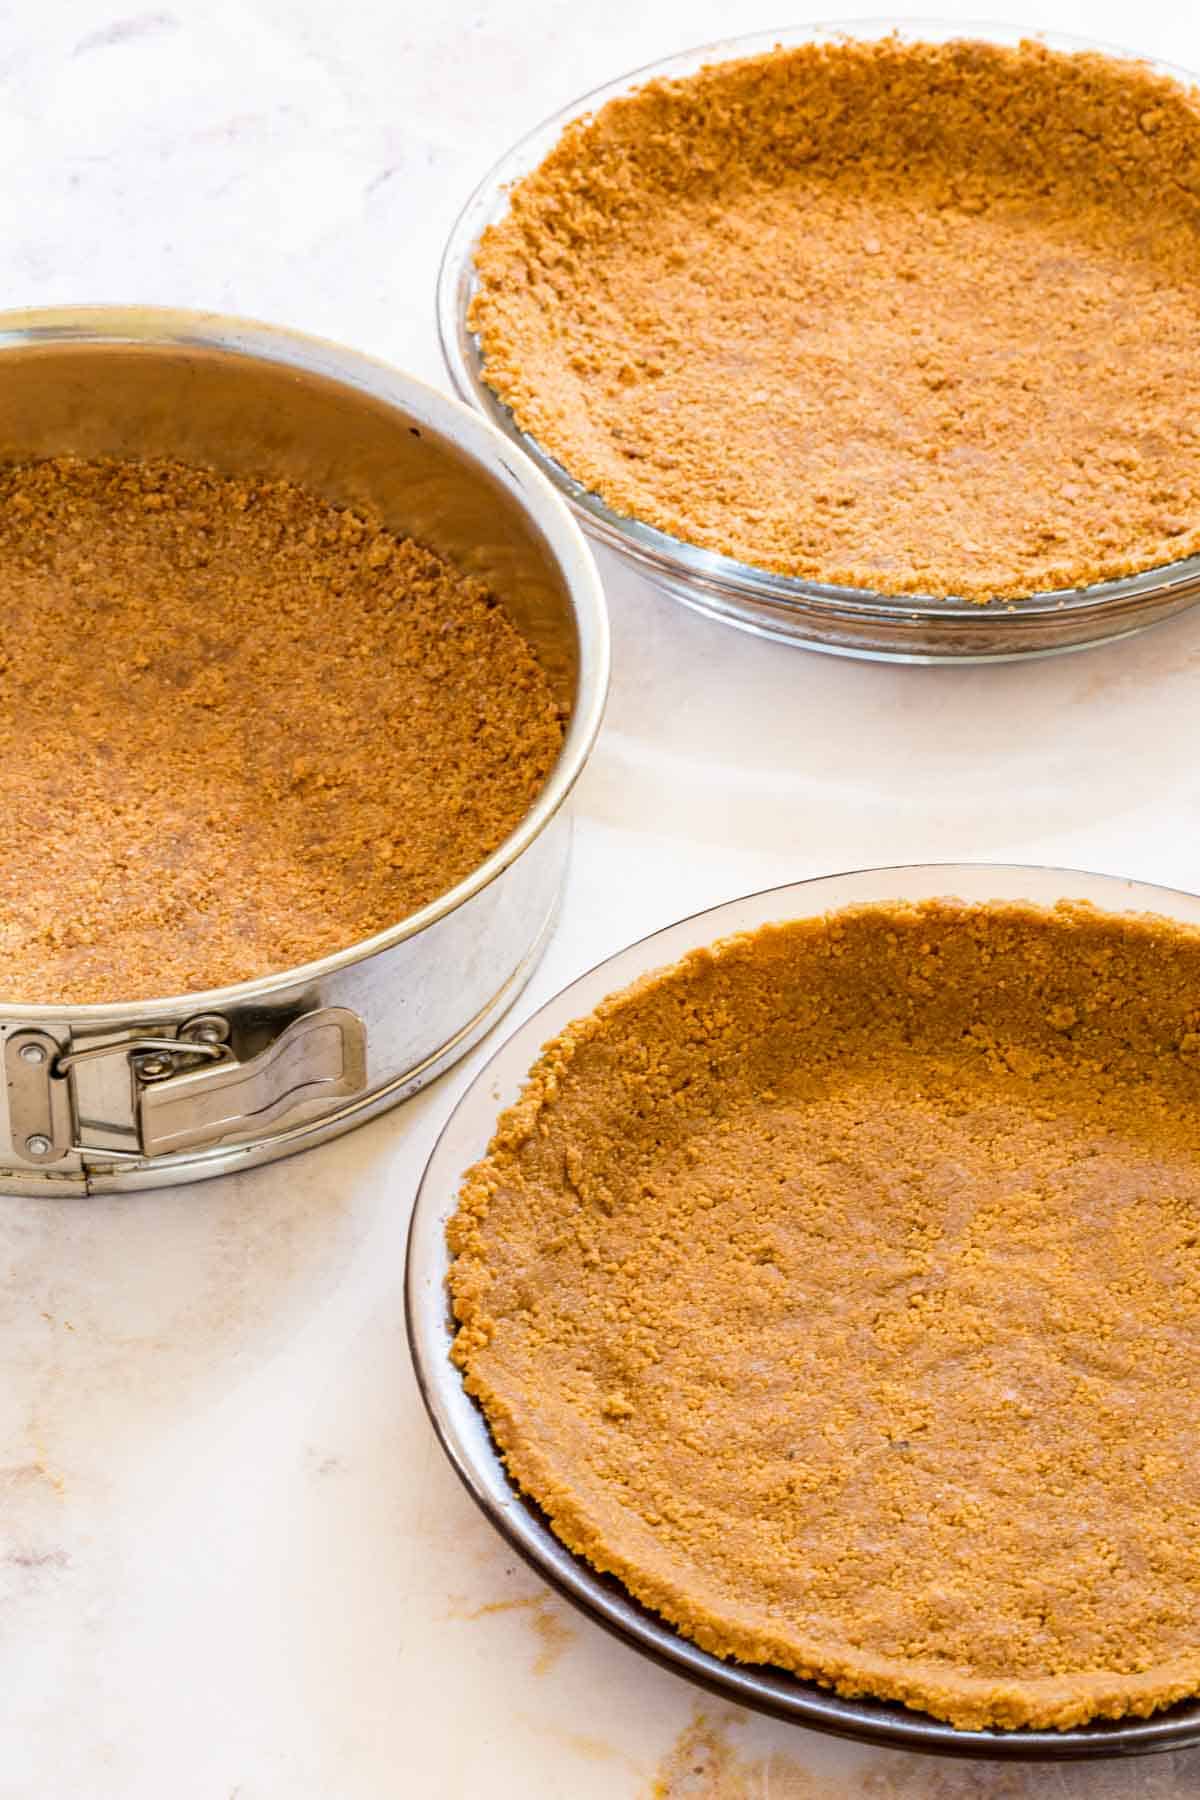 Gluten-free graham cracker crust pressed into two pie plates and a springform pan.